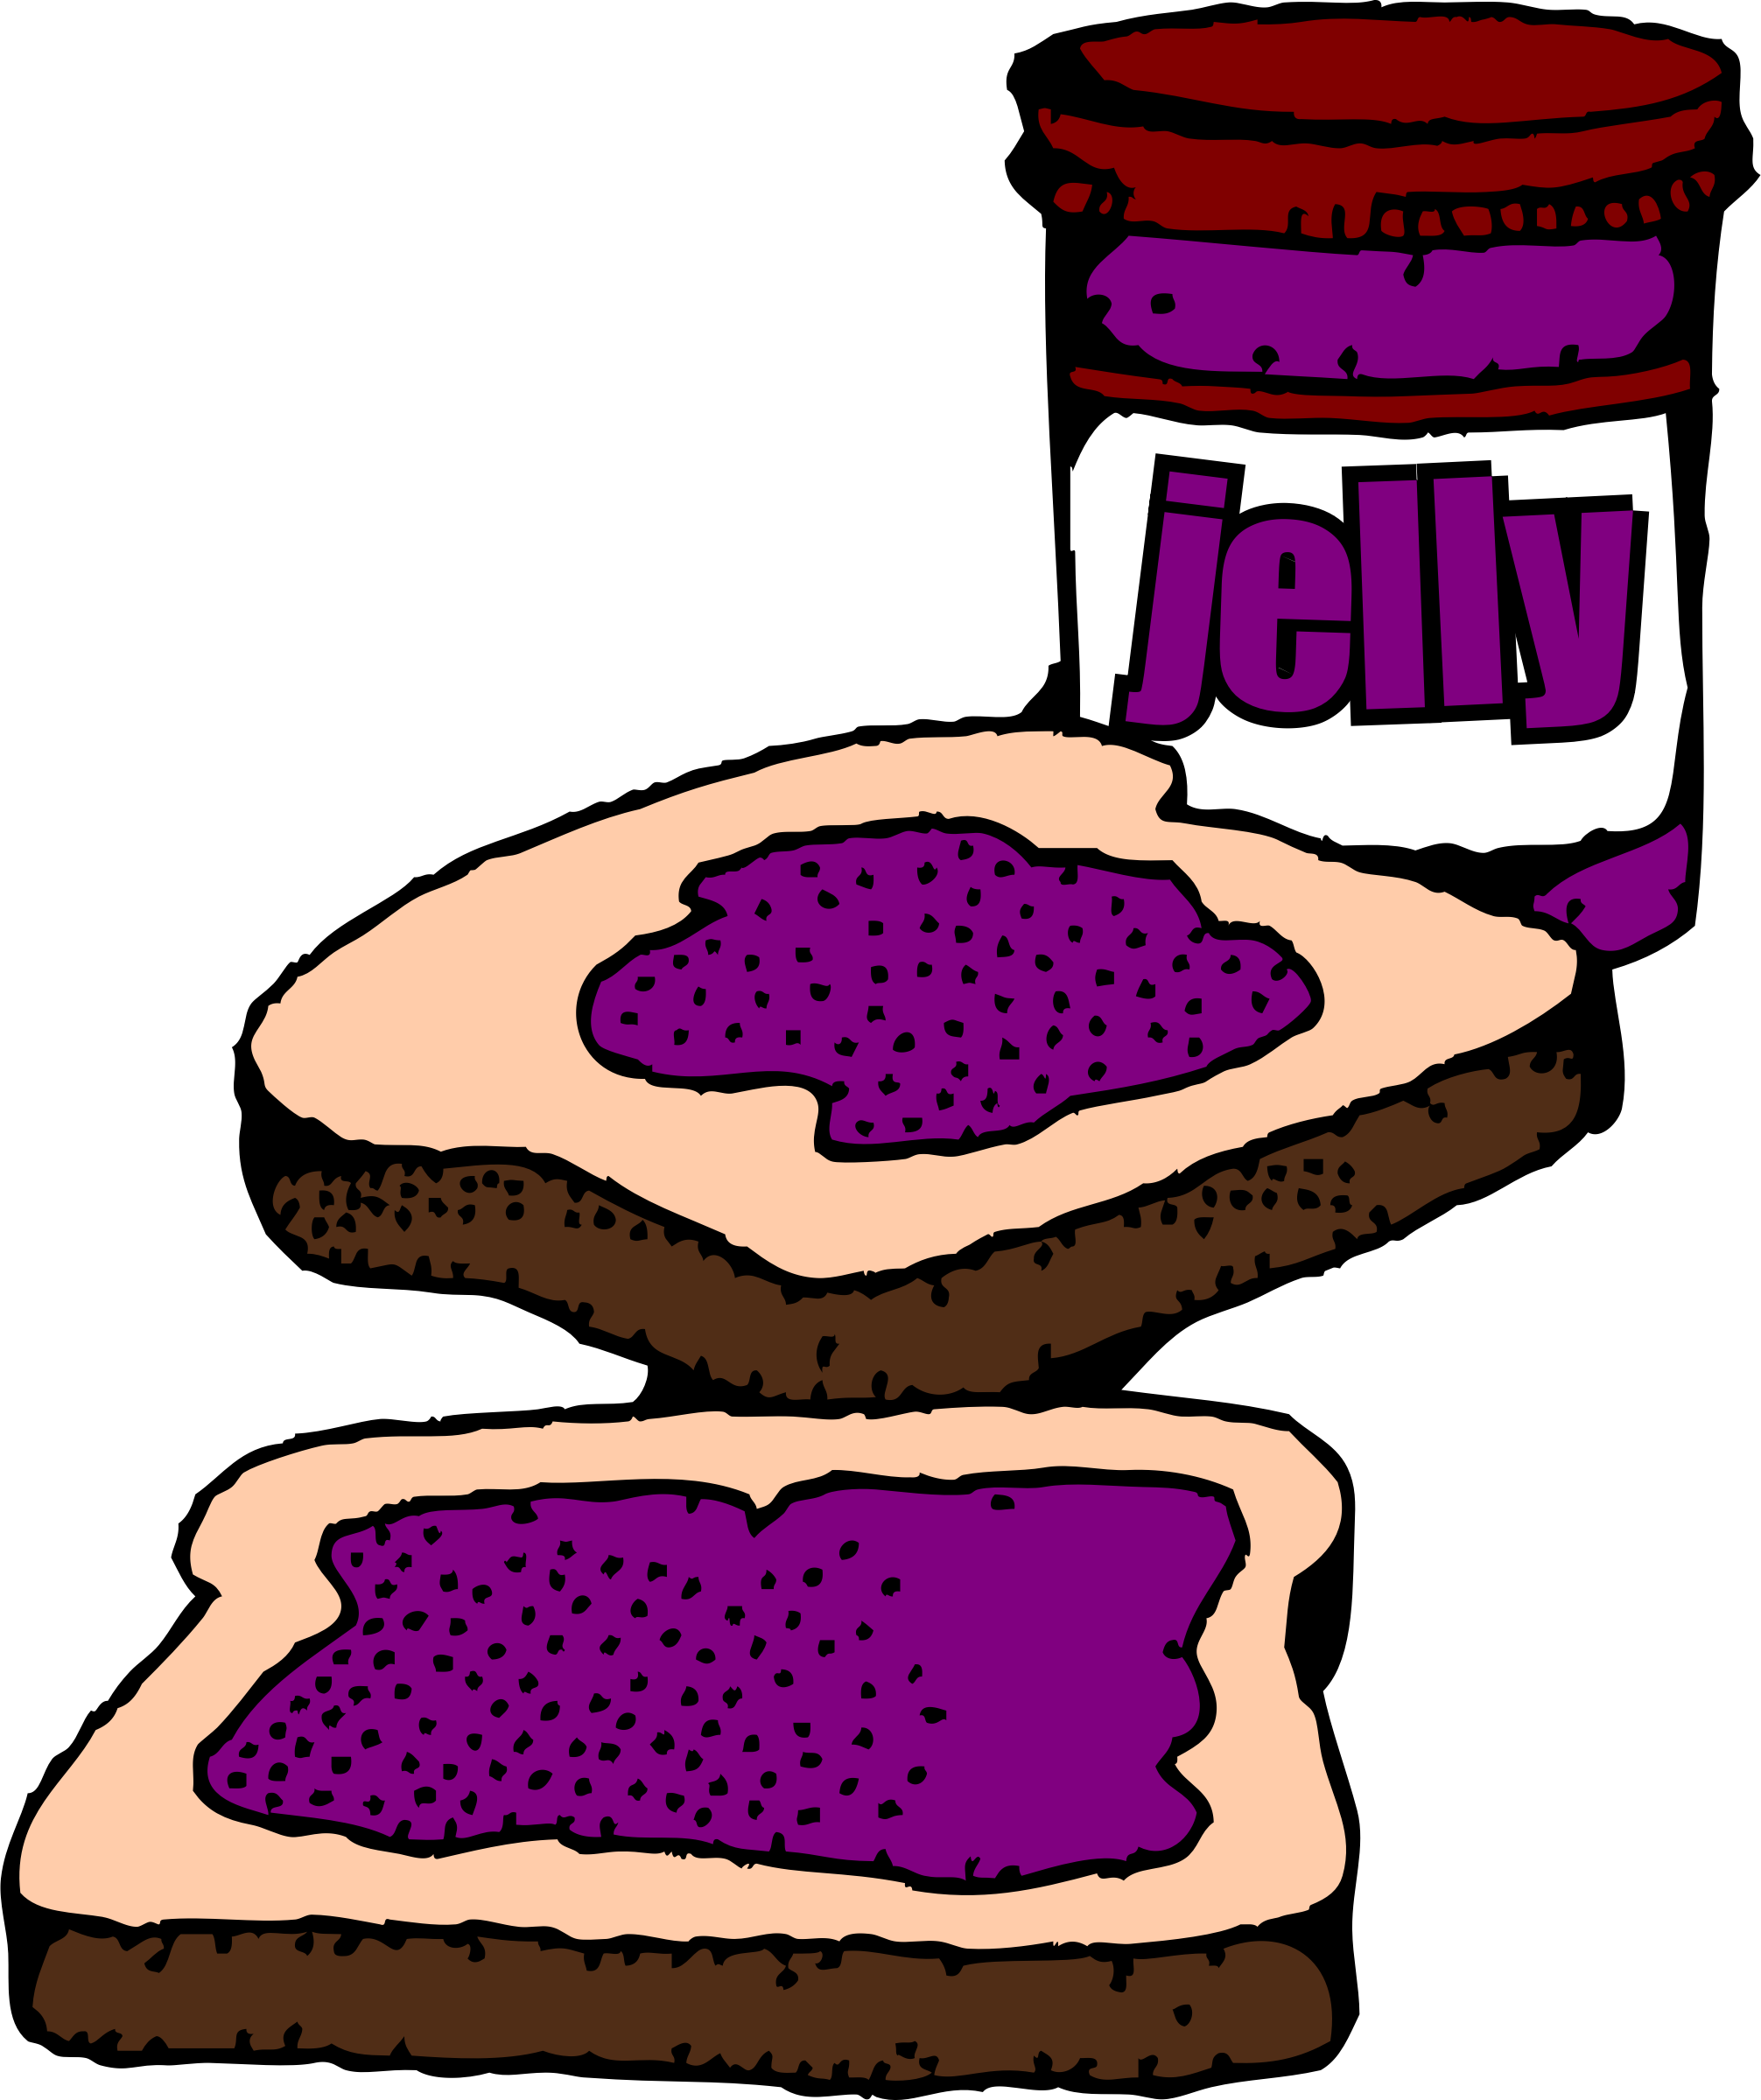 Images For > Peanut Butter And Jelly Sandwich Clip Art